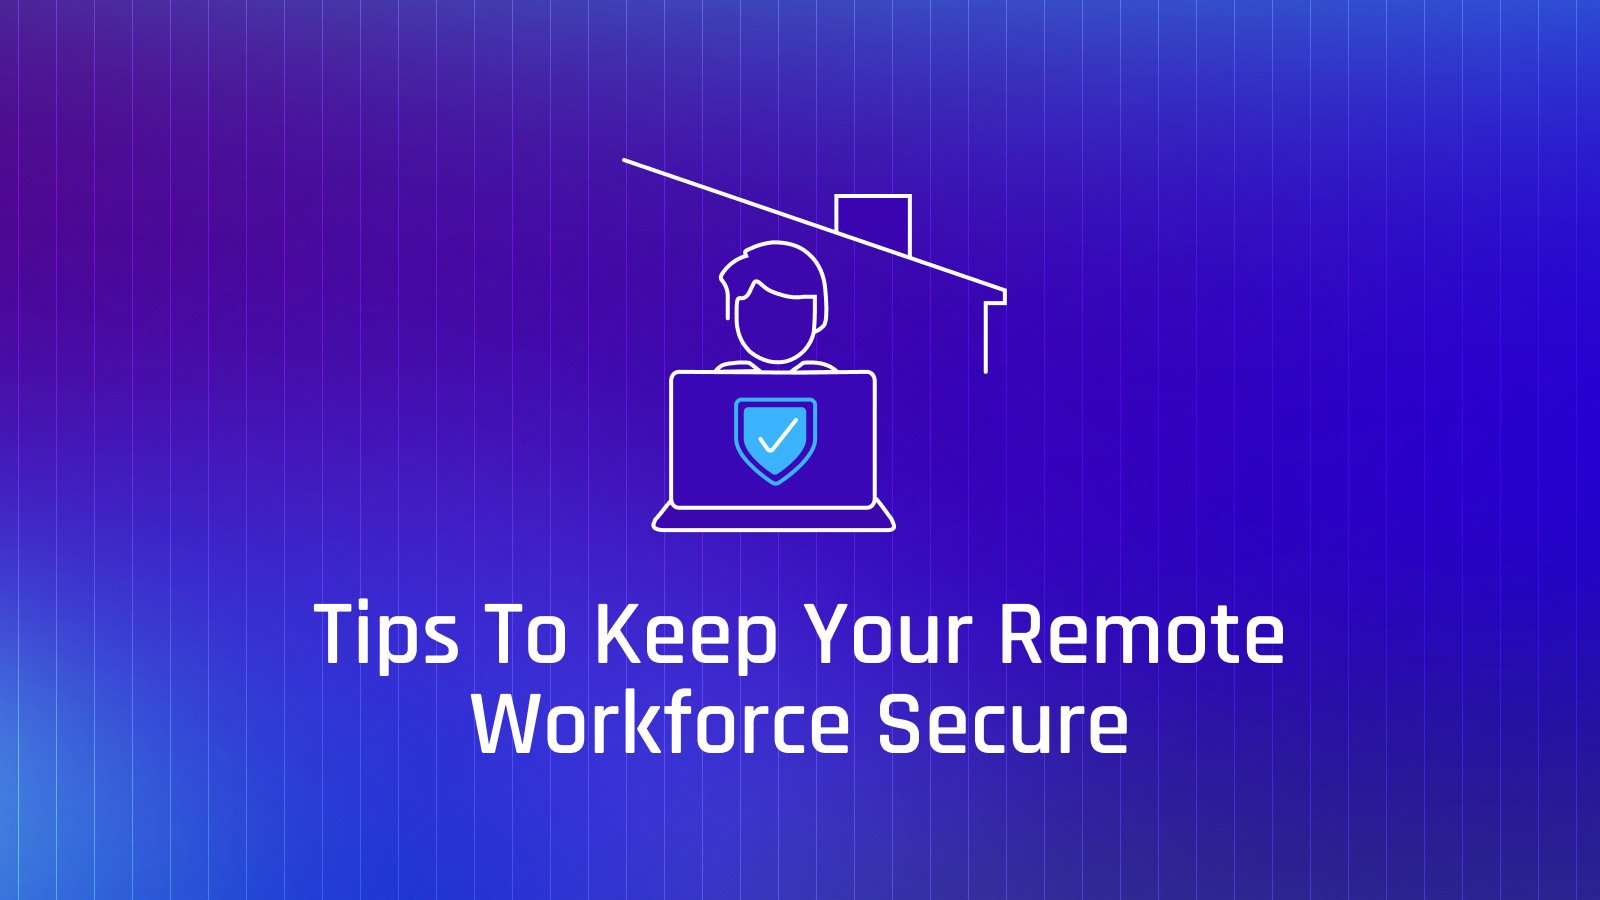 Tips for Securing Your Remote and Hybrid Workforce